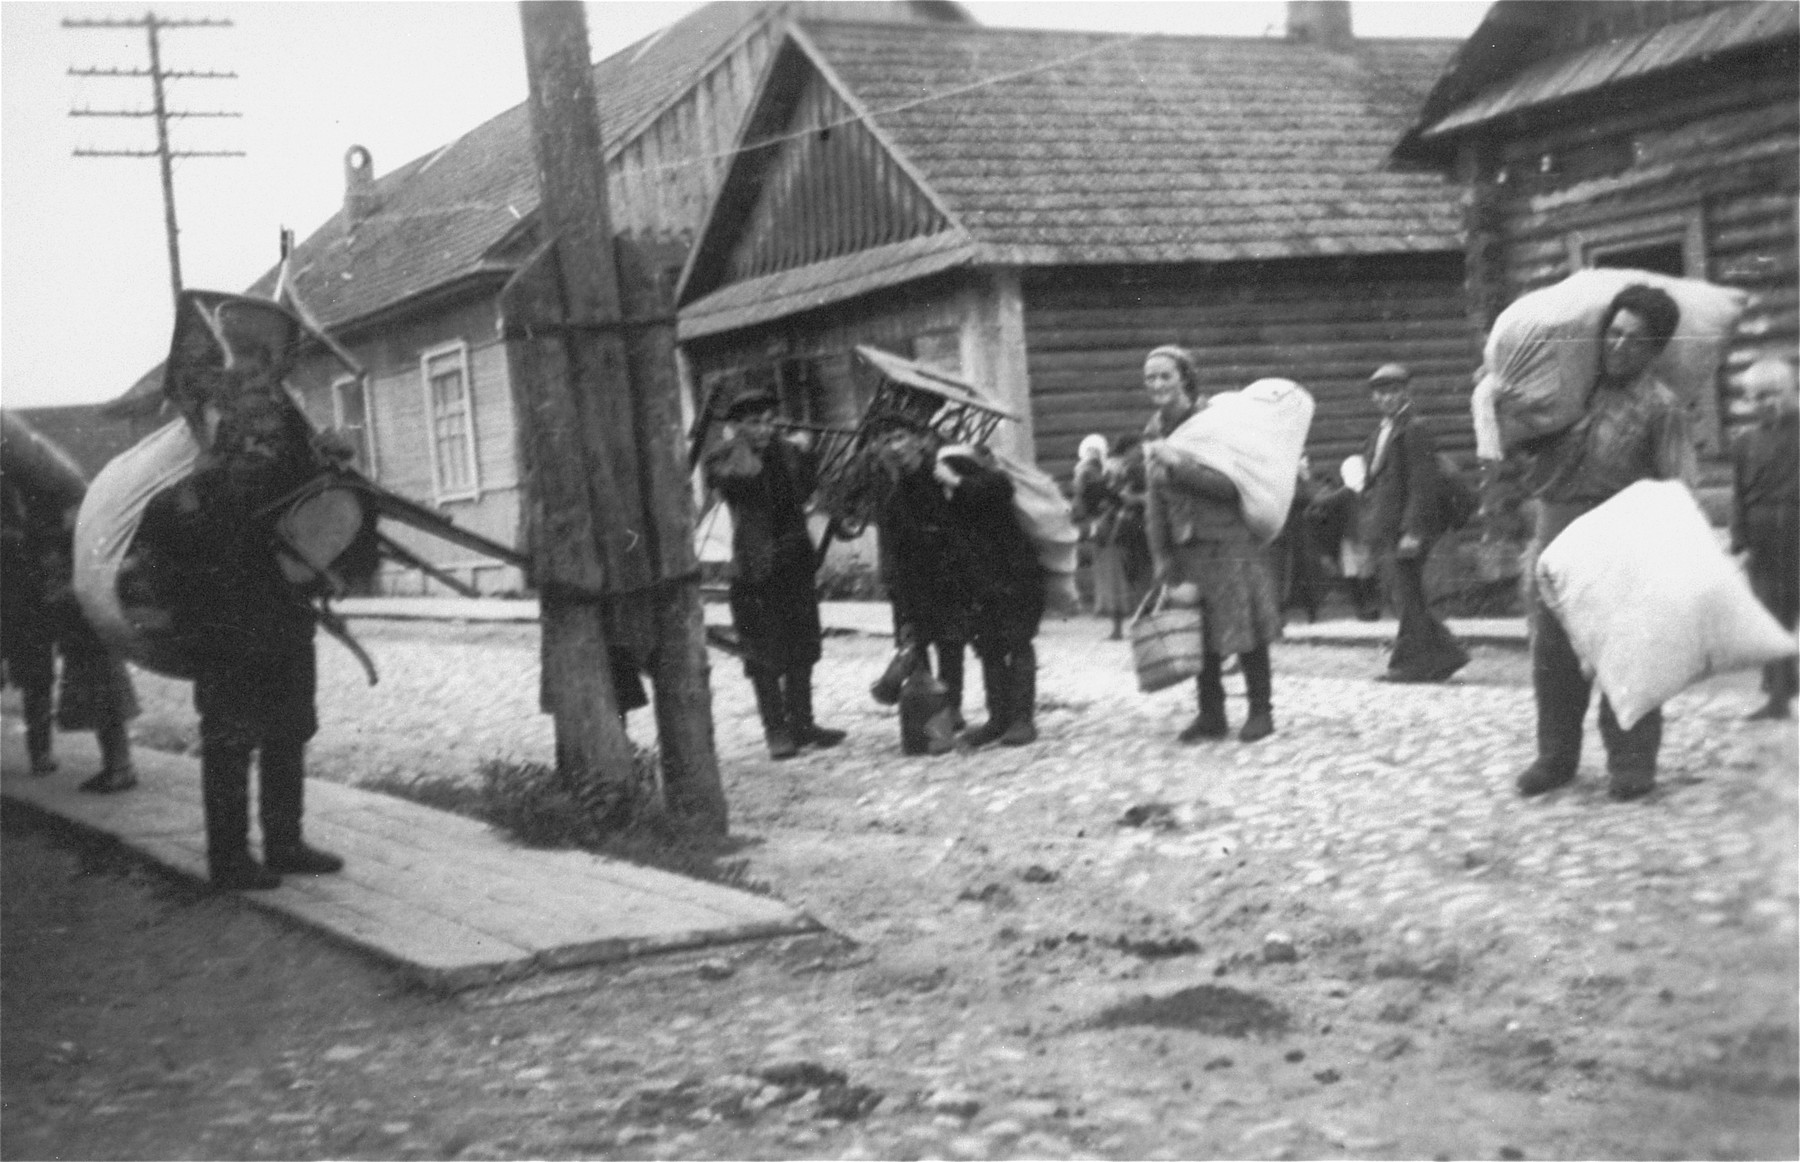 Jews in the Kovno ghetto carry furniture and large bundles.

They are probably moving to new homes following a reduction of the ghetto's borders.